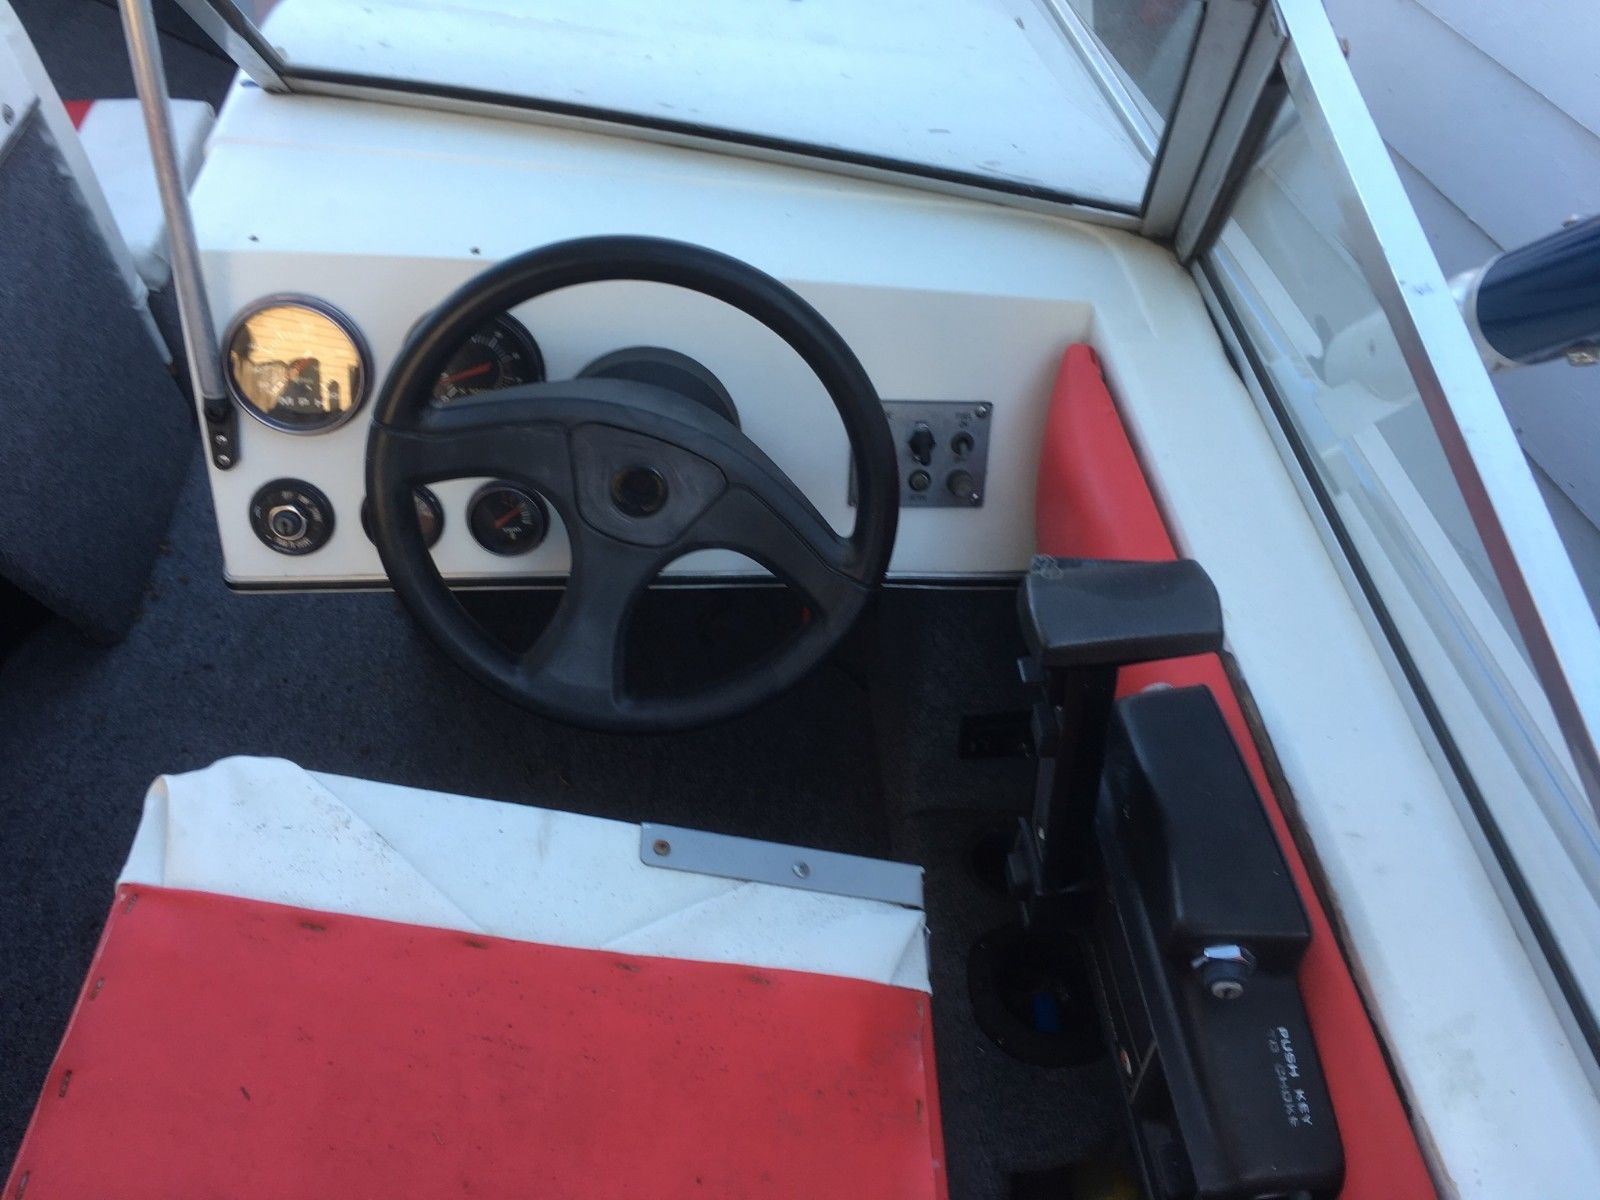 1984 checkmate boat